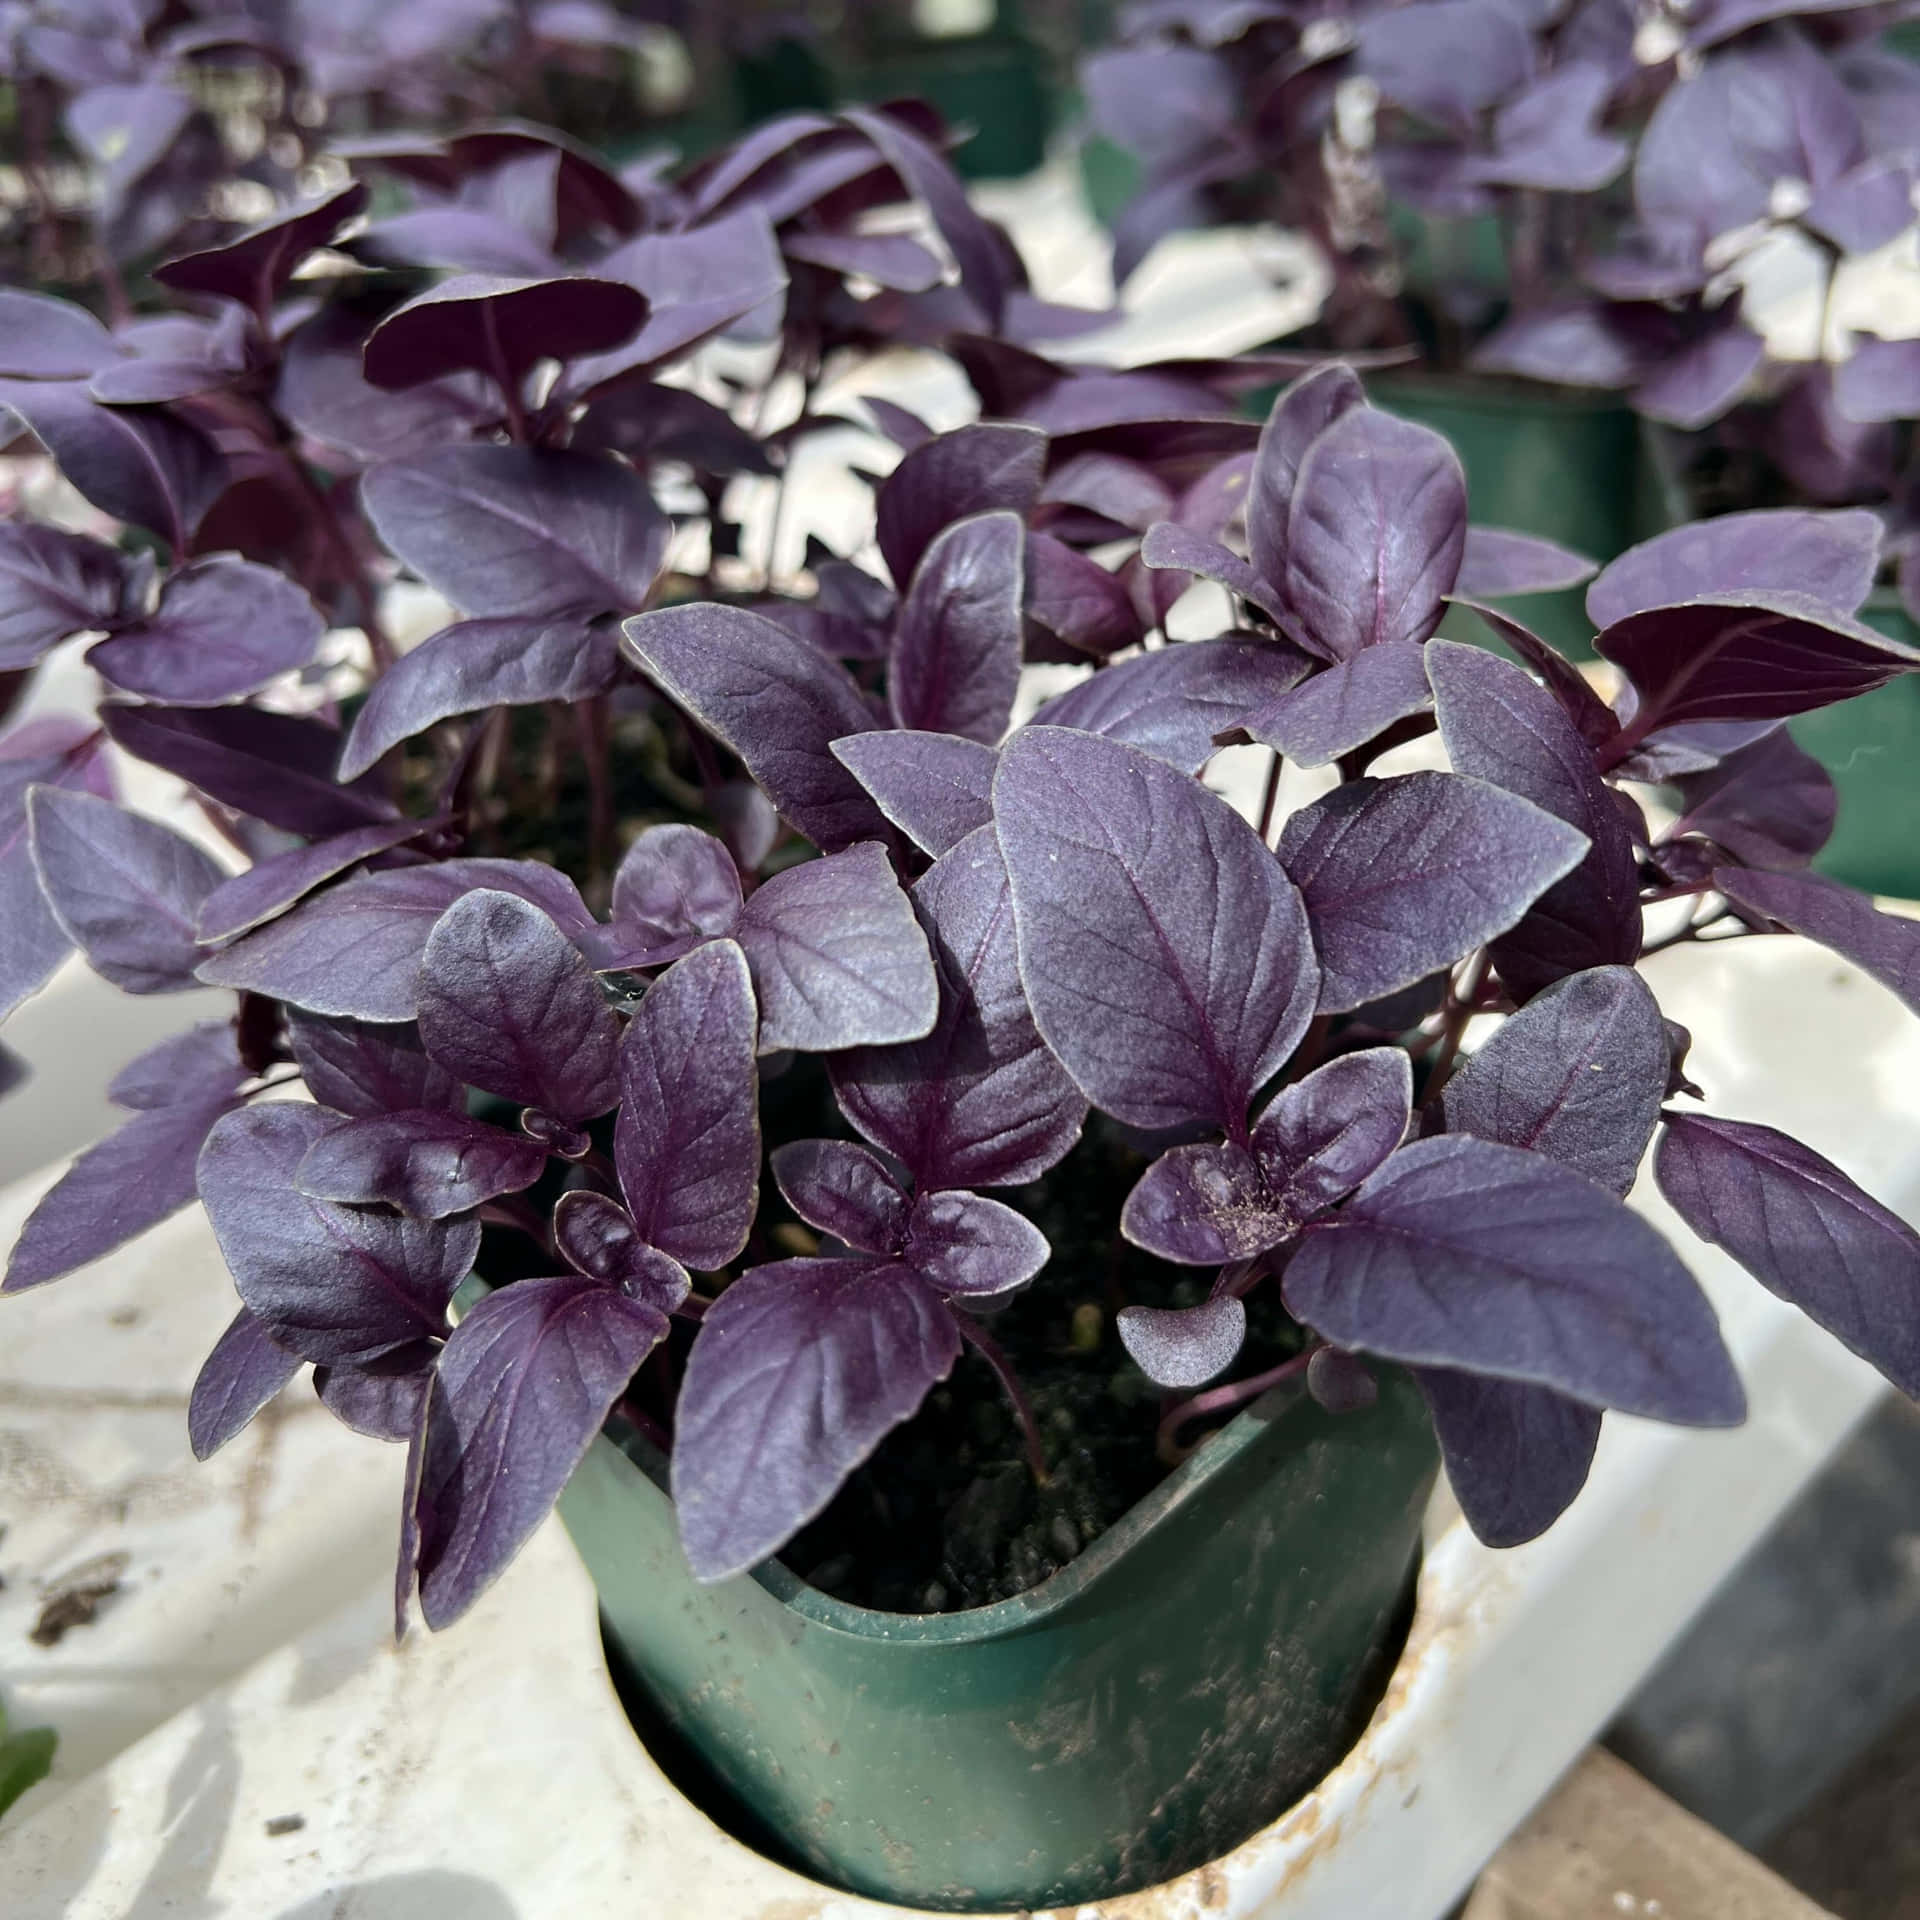 Growing your own Purple Basil at home Wallpaper